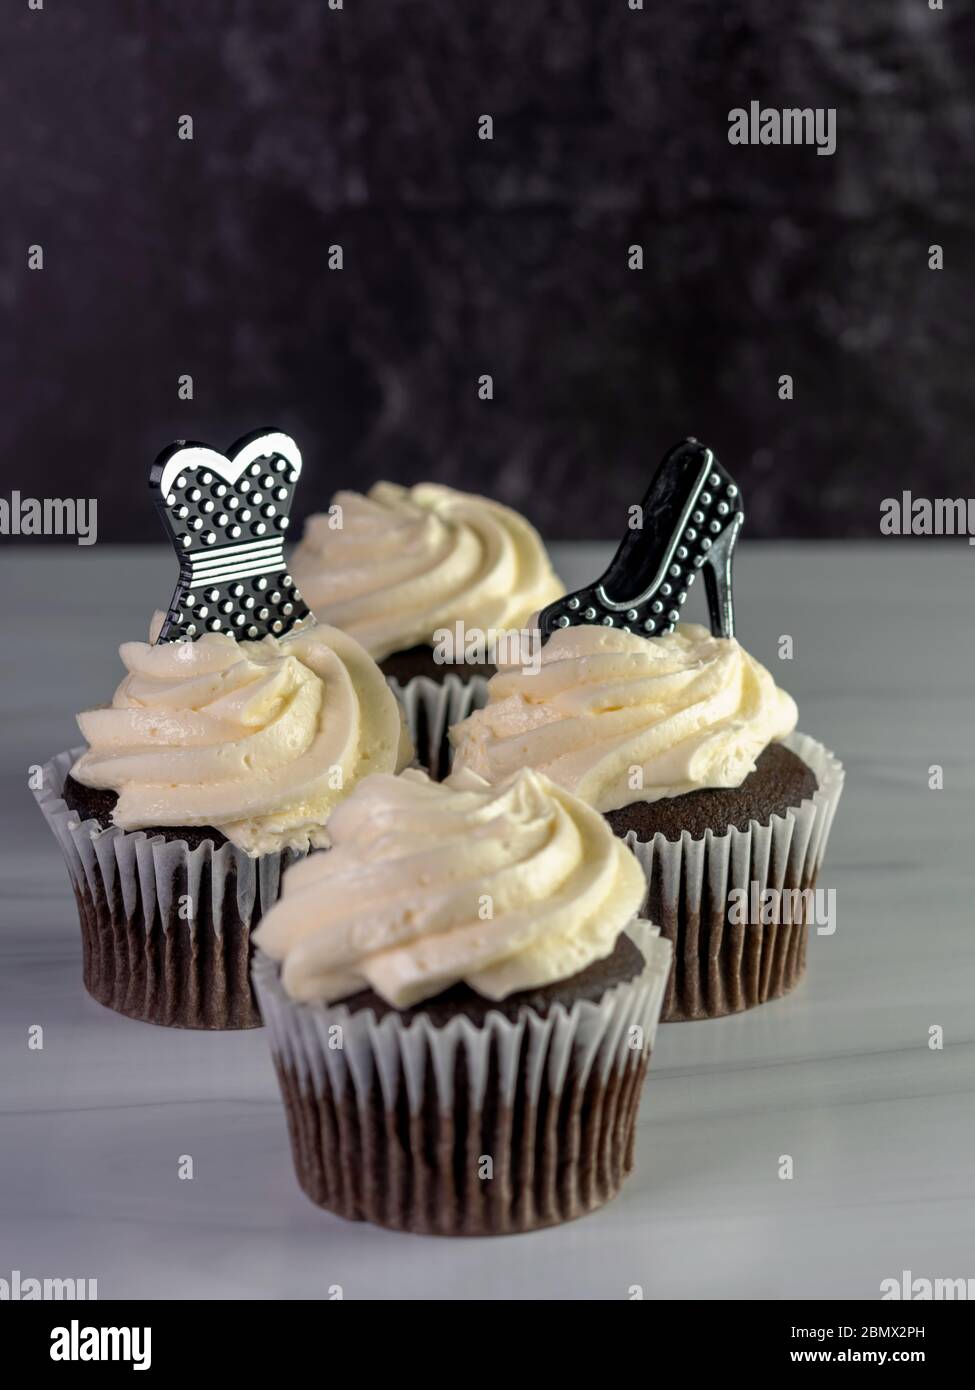 4 chocolate cupcakes with white frosting swirled high with a black and silver polka dot high heel shoe and prom dress garnishing them, on a white coun Stock Photo